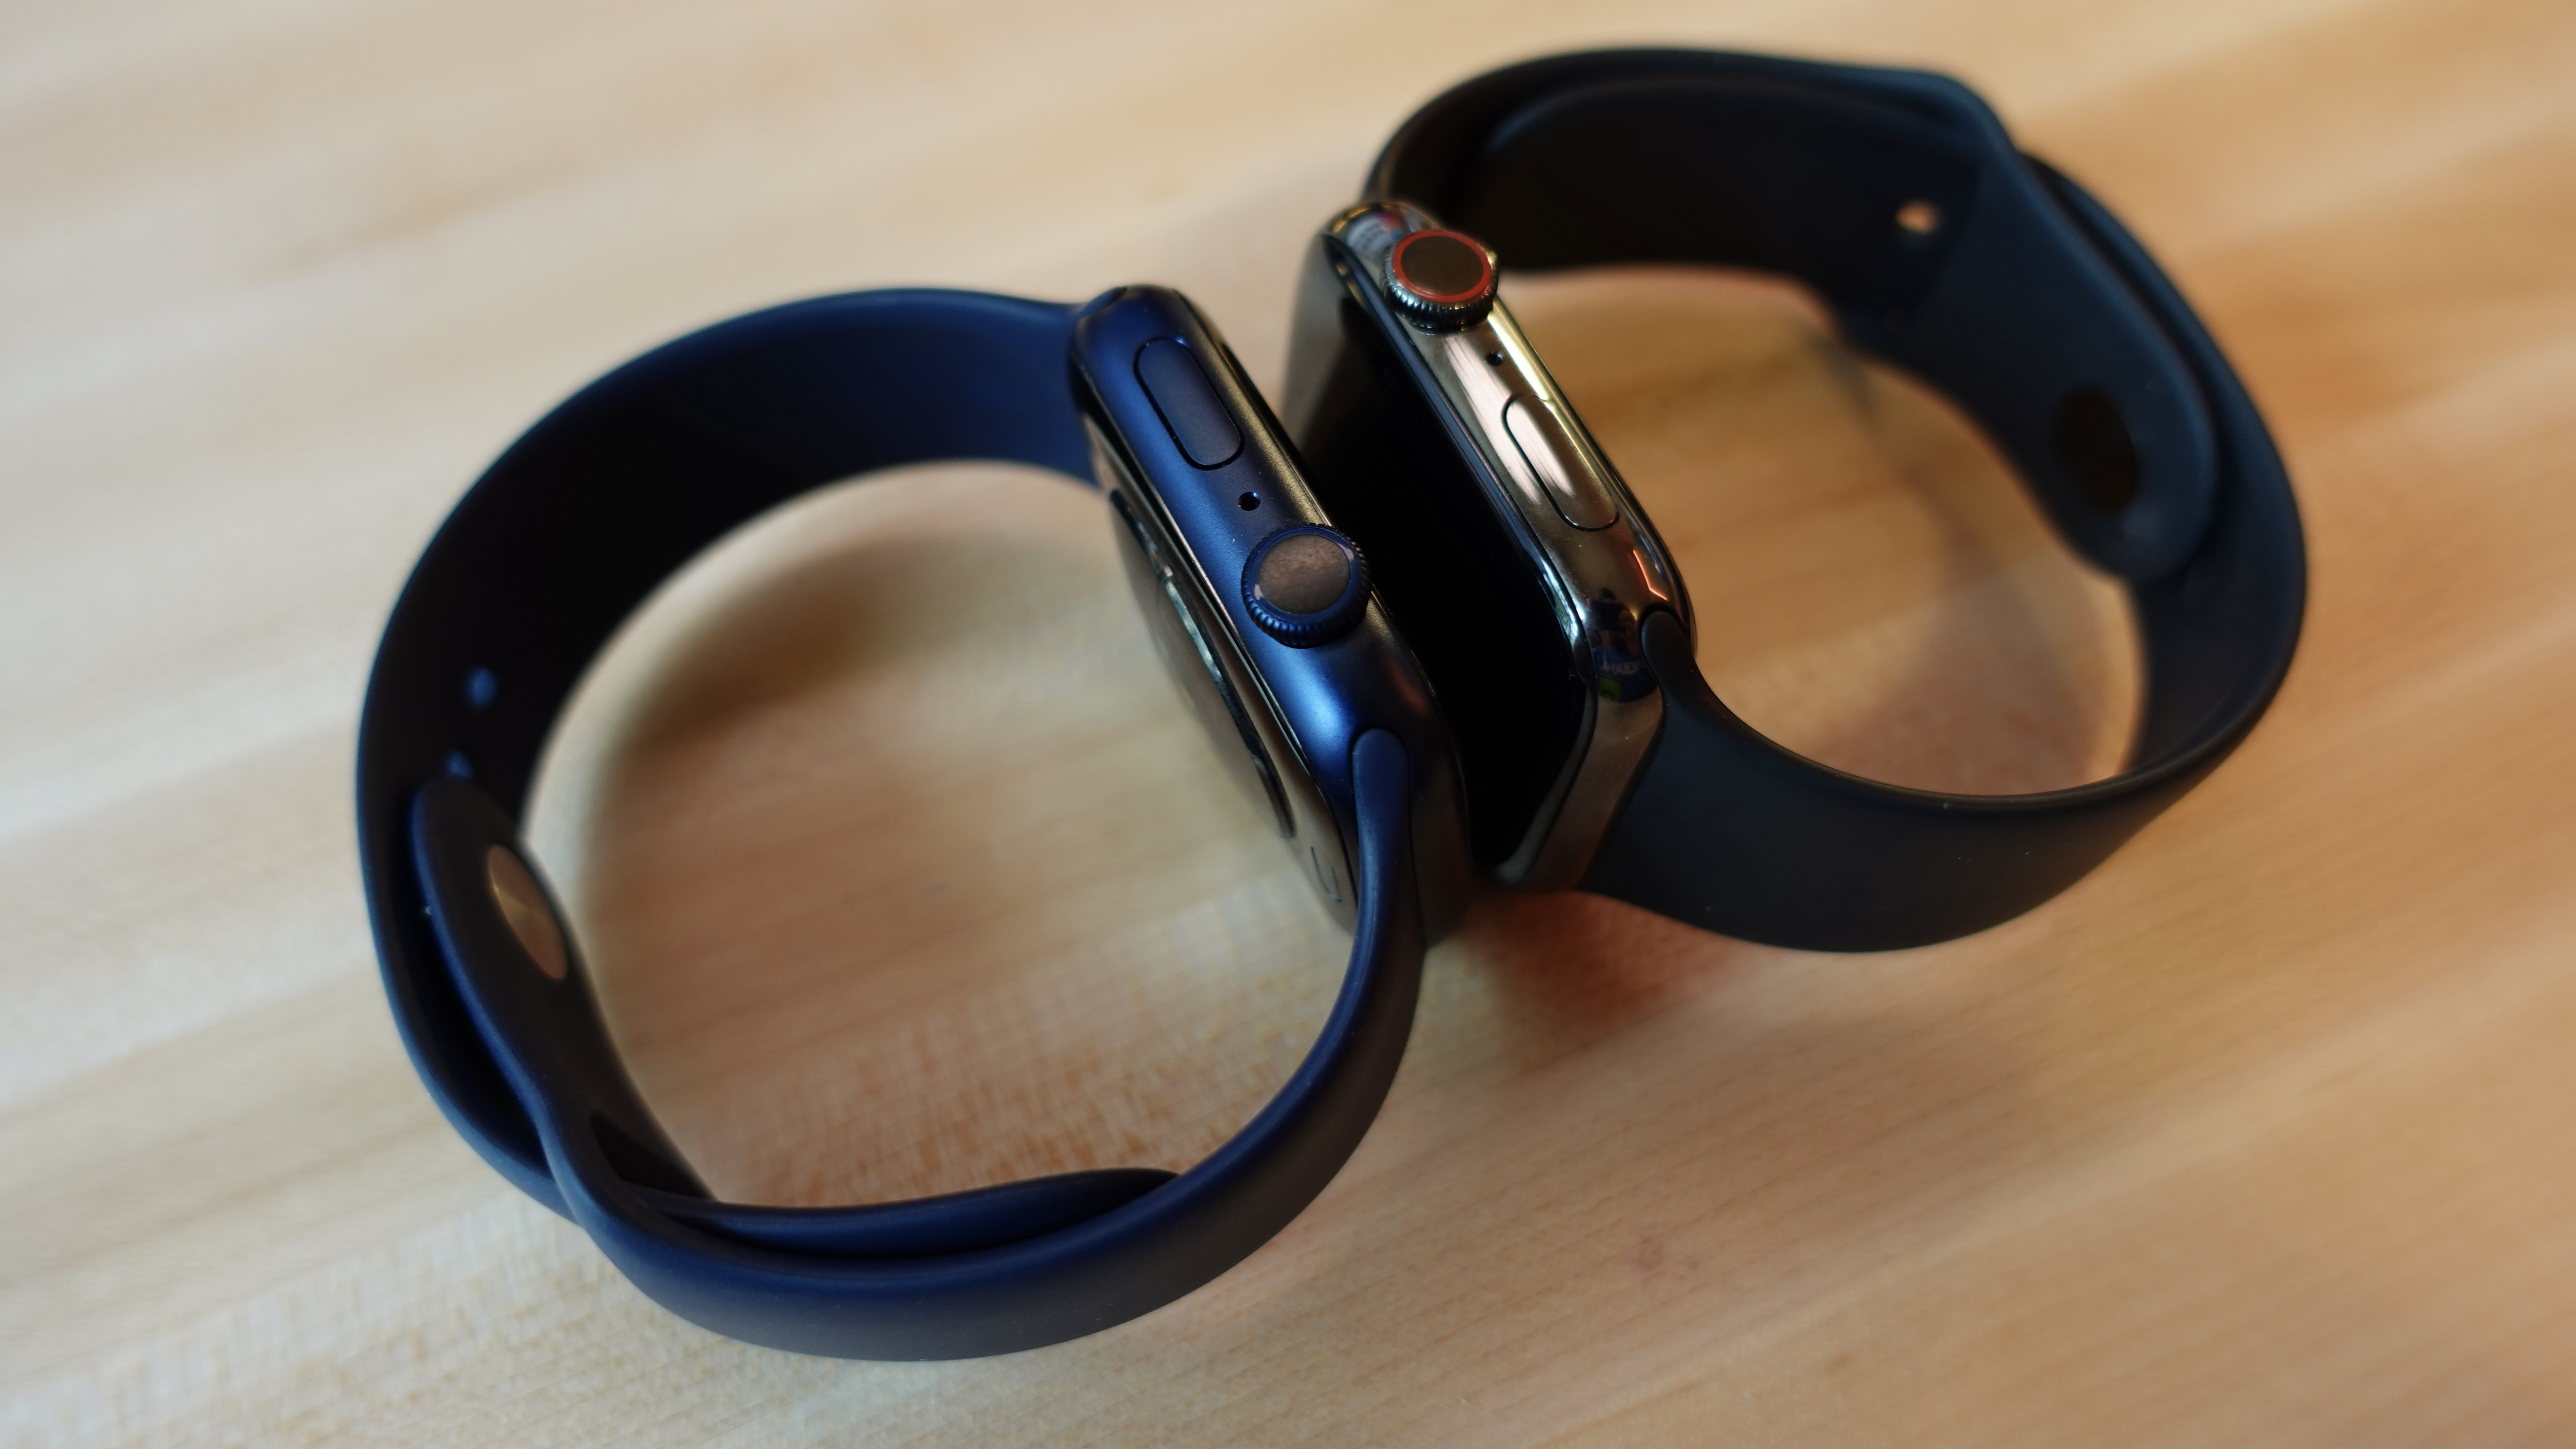 photo of Apple Watch Series 6 Diary: Graphite hands-on and battery life tests image